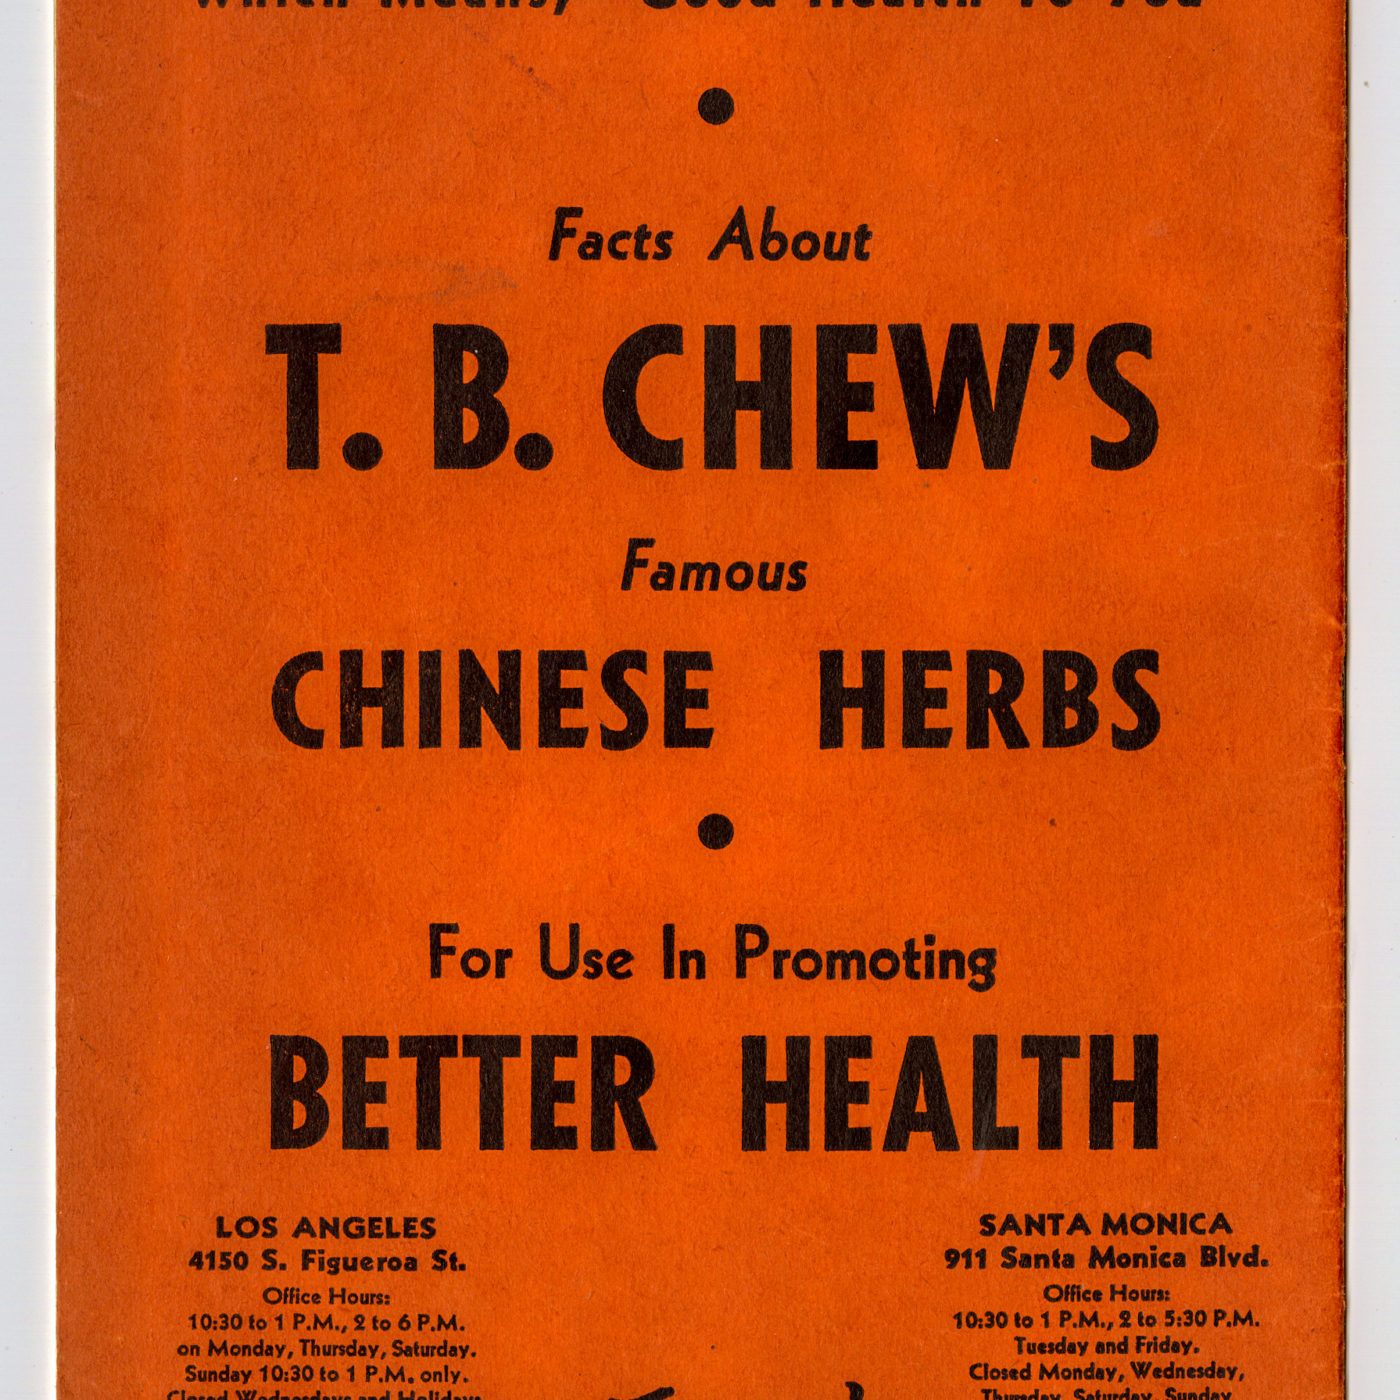 Facts About T.B. Chew's Famous Chinese Herbs Pamplet, back cover. Courtesy of Roy Delbyck, Museum of Chinese in America (MOCA) Collection.